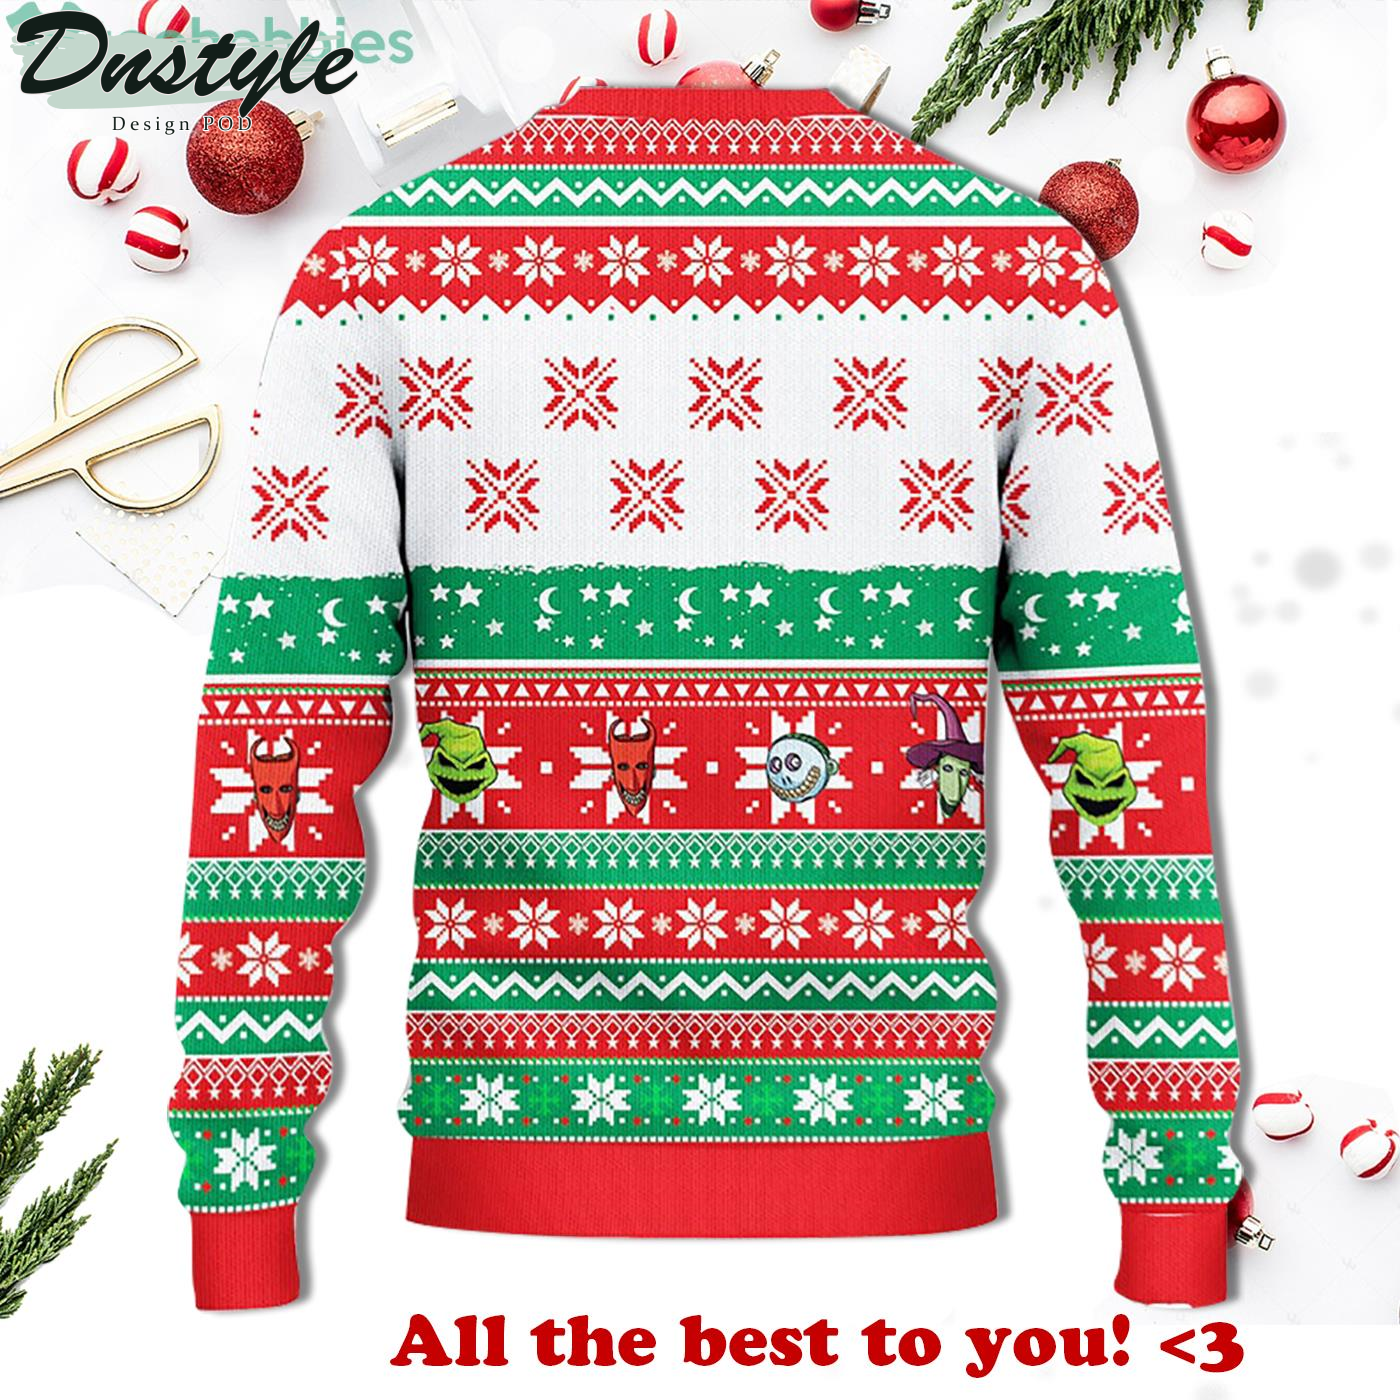 The Nightmare Before Friends Ugly Christmas Sweater